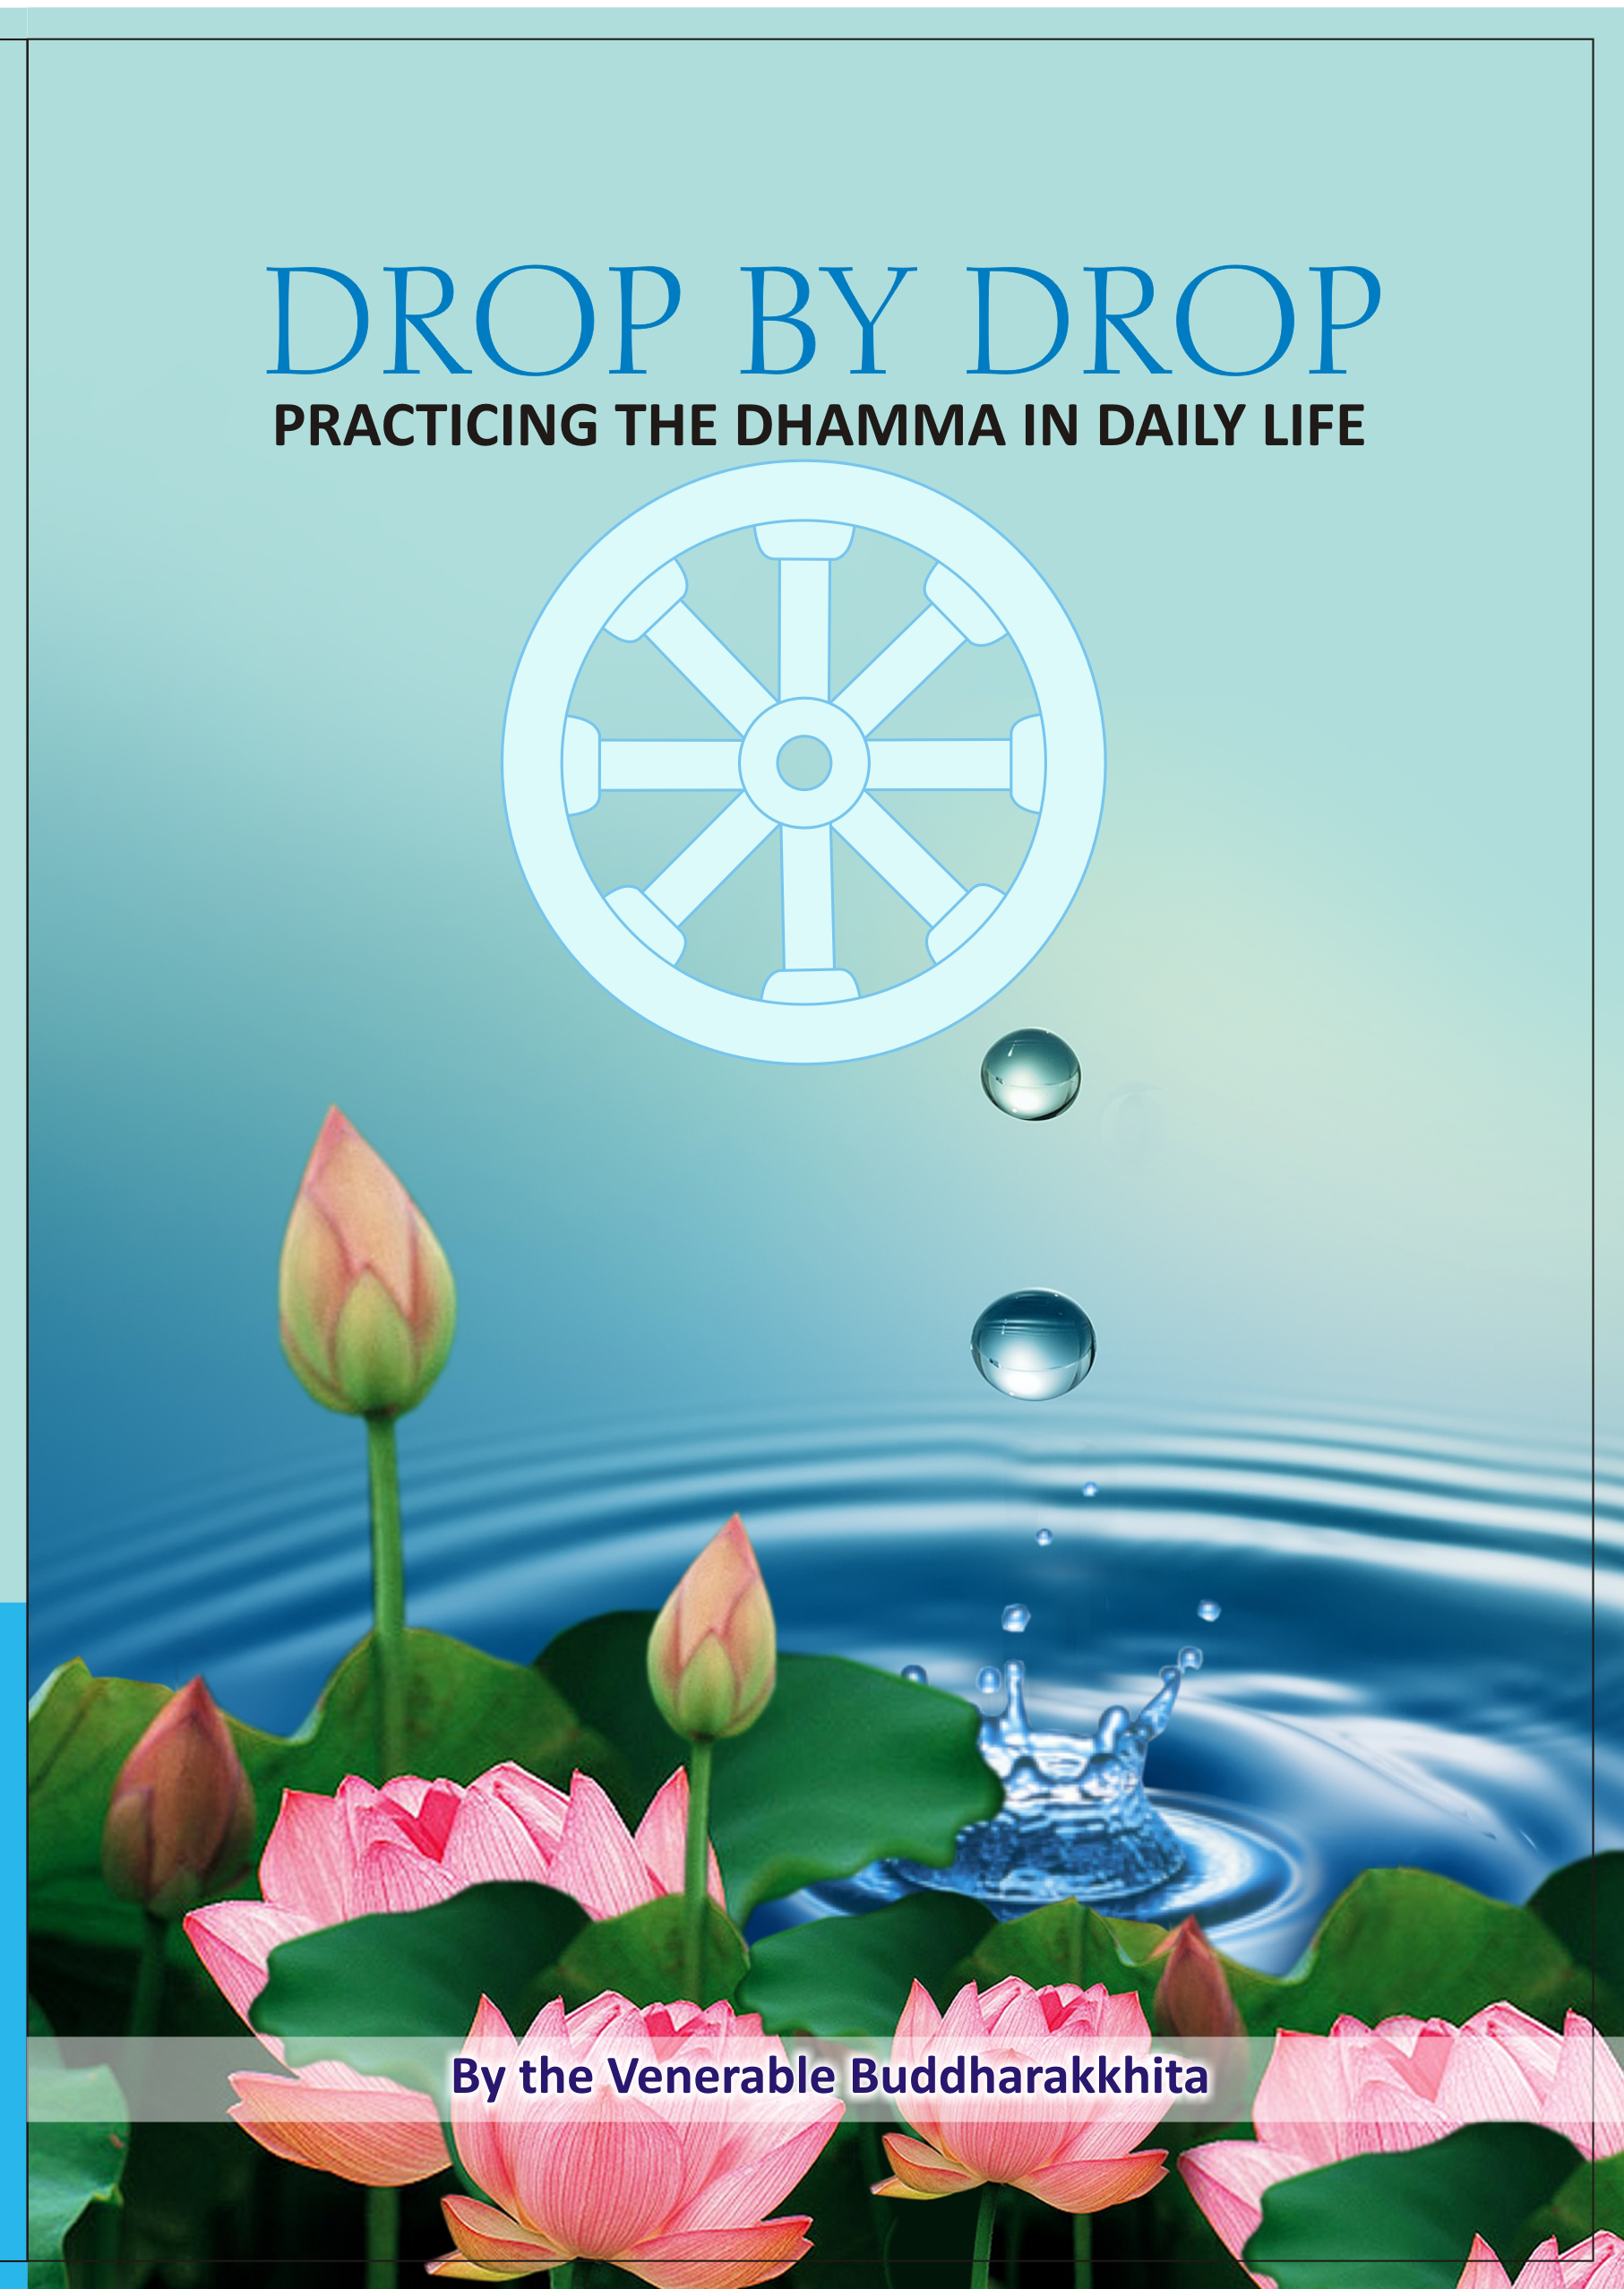 Drop by Drop: The Buddha’s Path to True Happiness